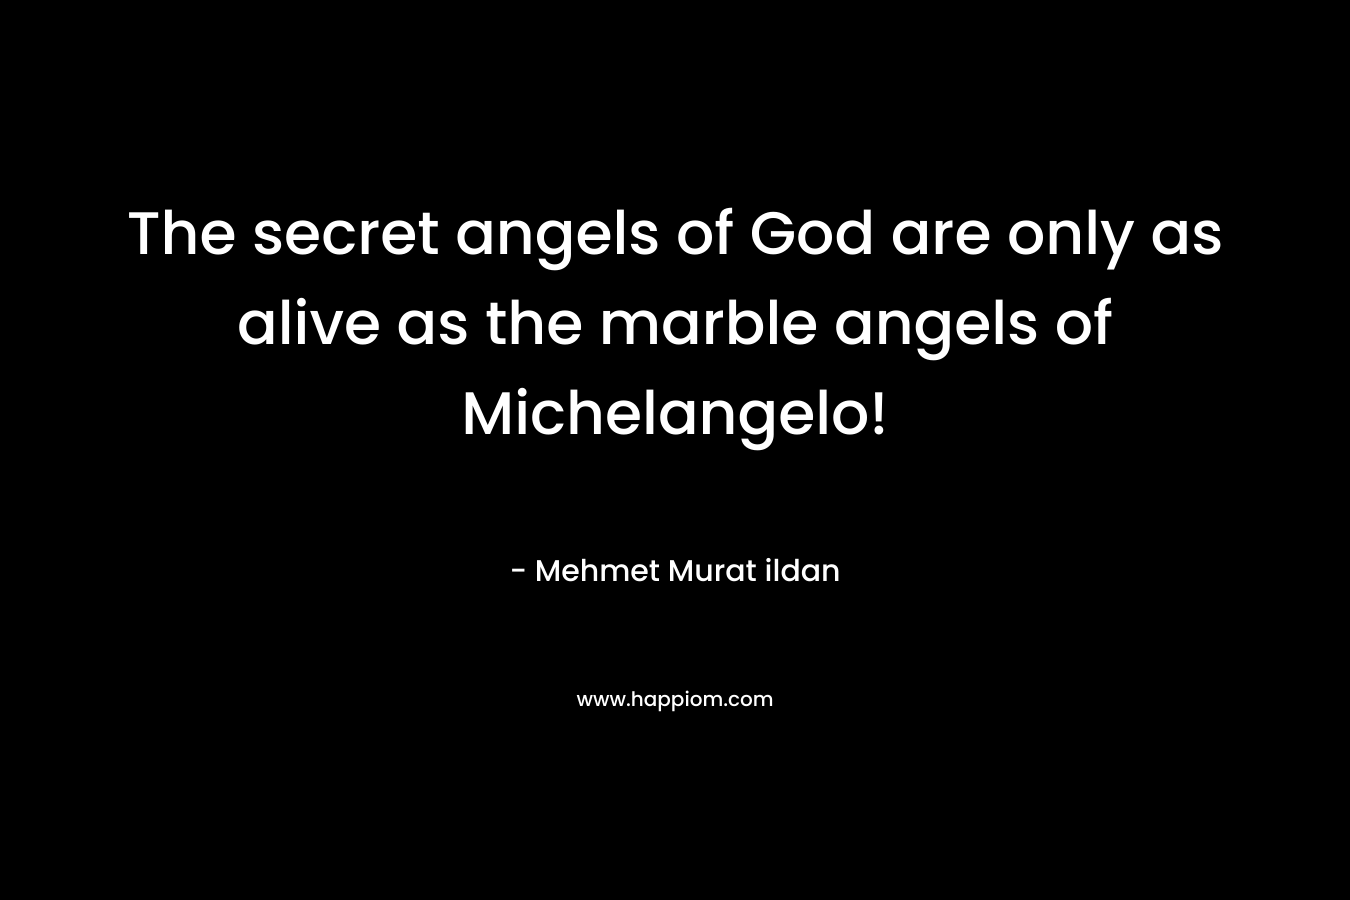 The secret angels of God are only as alive as the marble angels of Michelangelo!